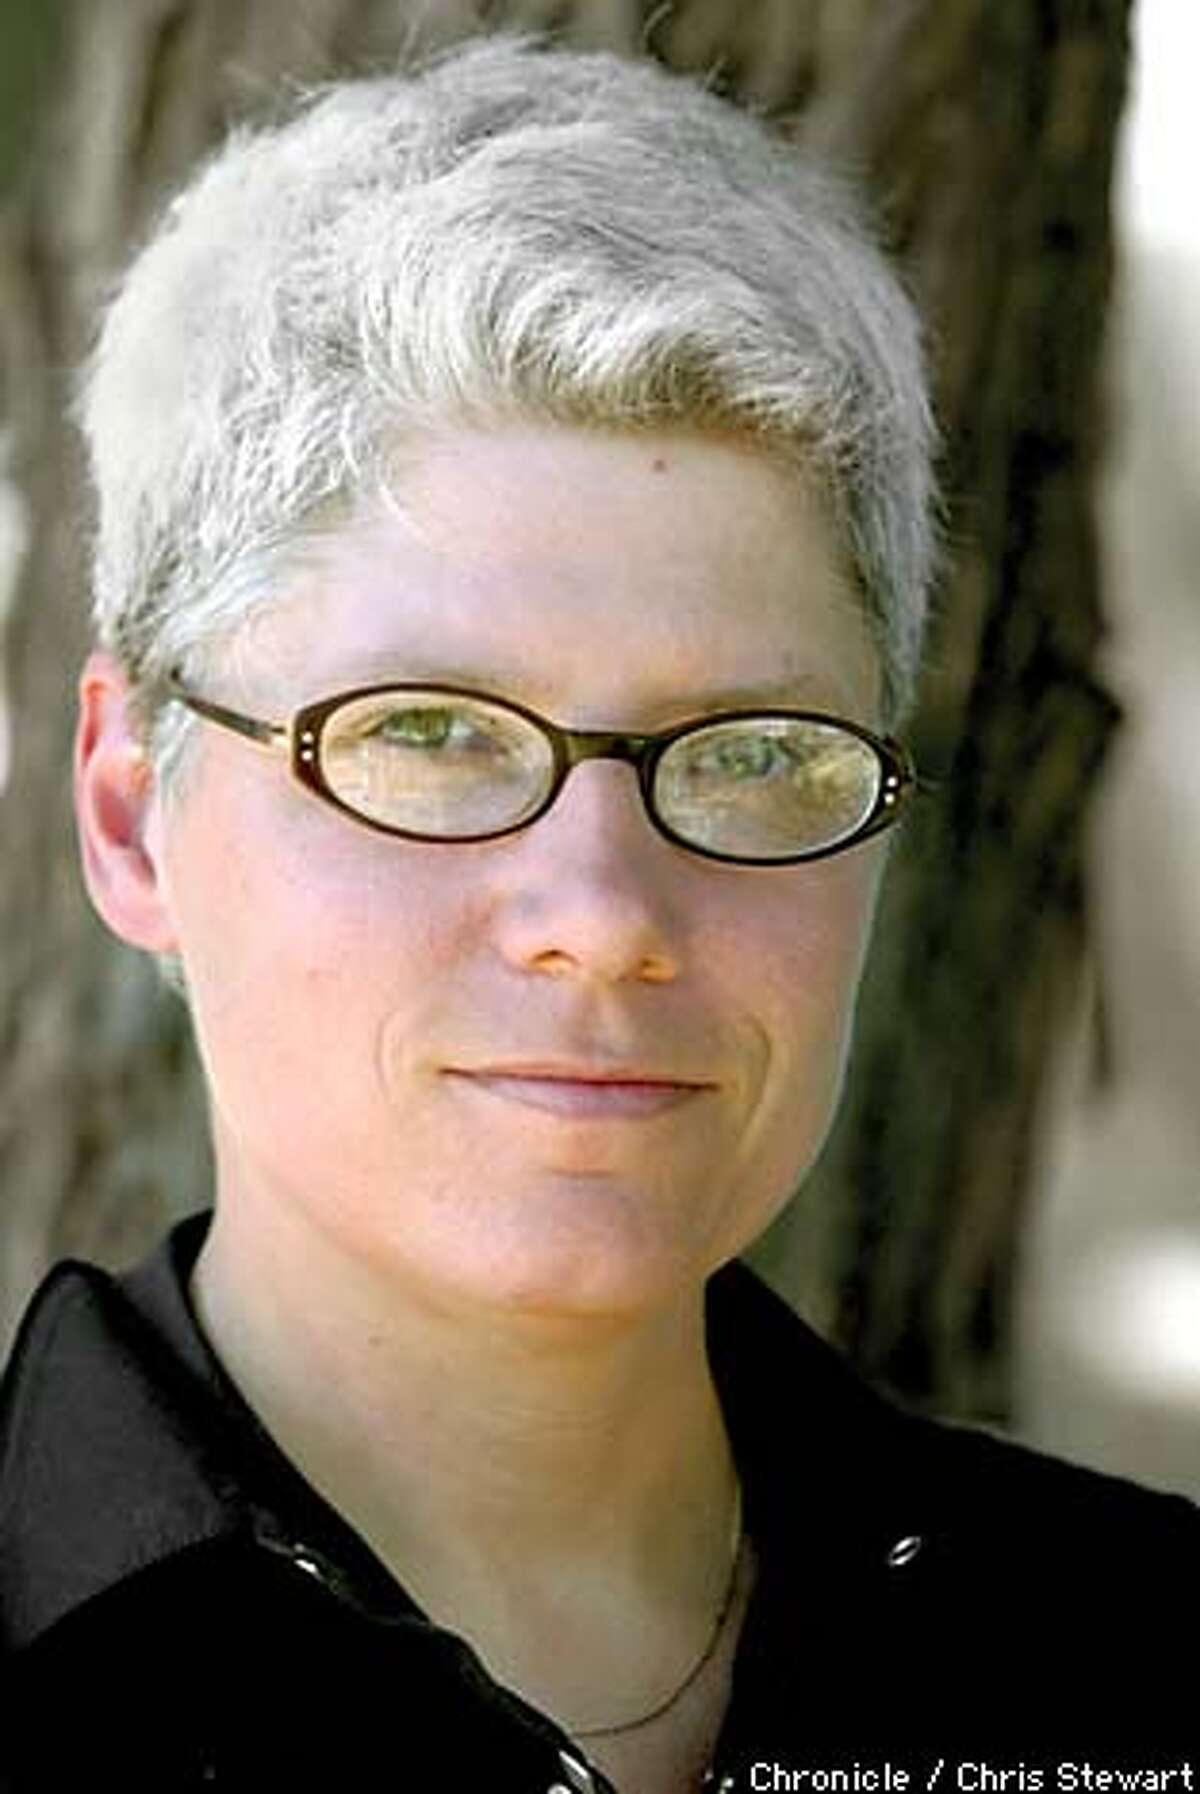 Cheryl Chase is the founder and executive director of the Intersex Society of North America, an advocacy organization for people who were born with ambiguous genitals. Chronicle photo by Chris Stewart